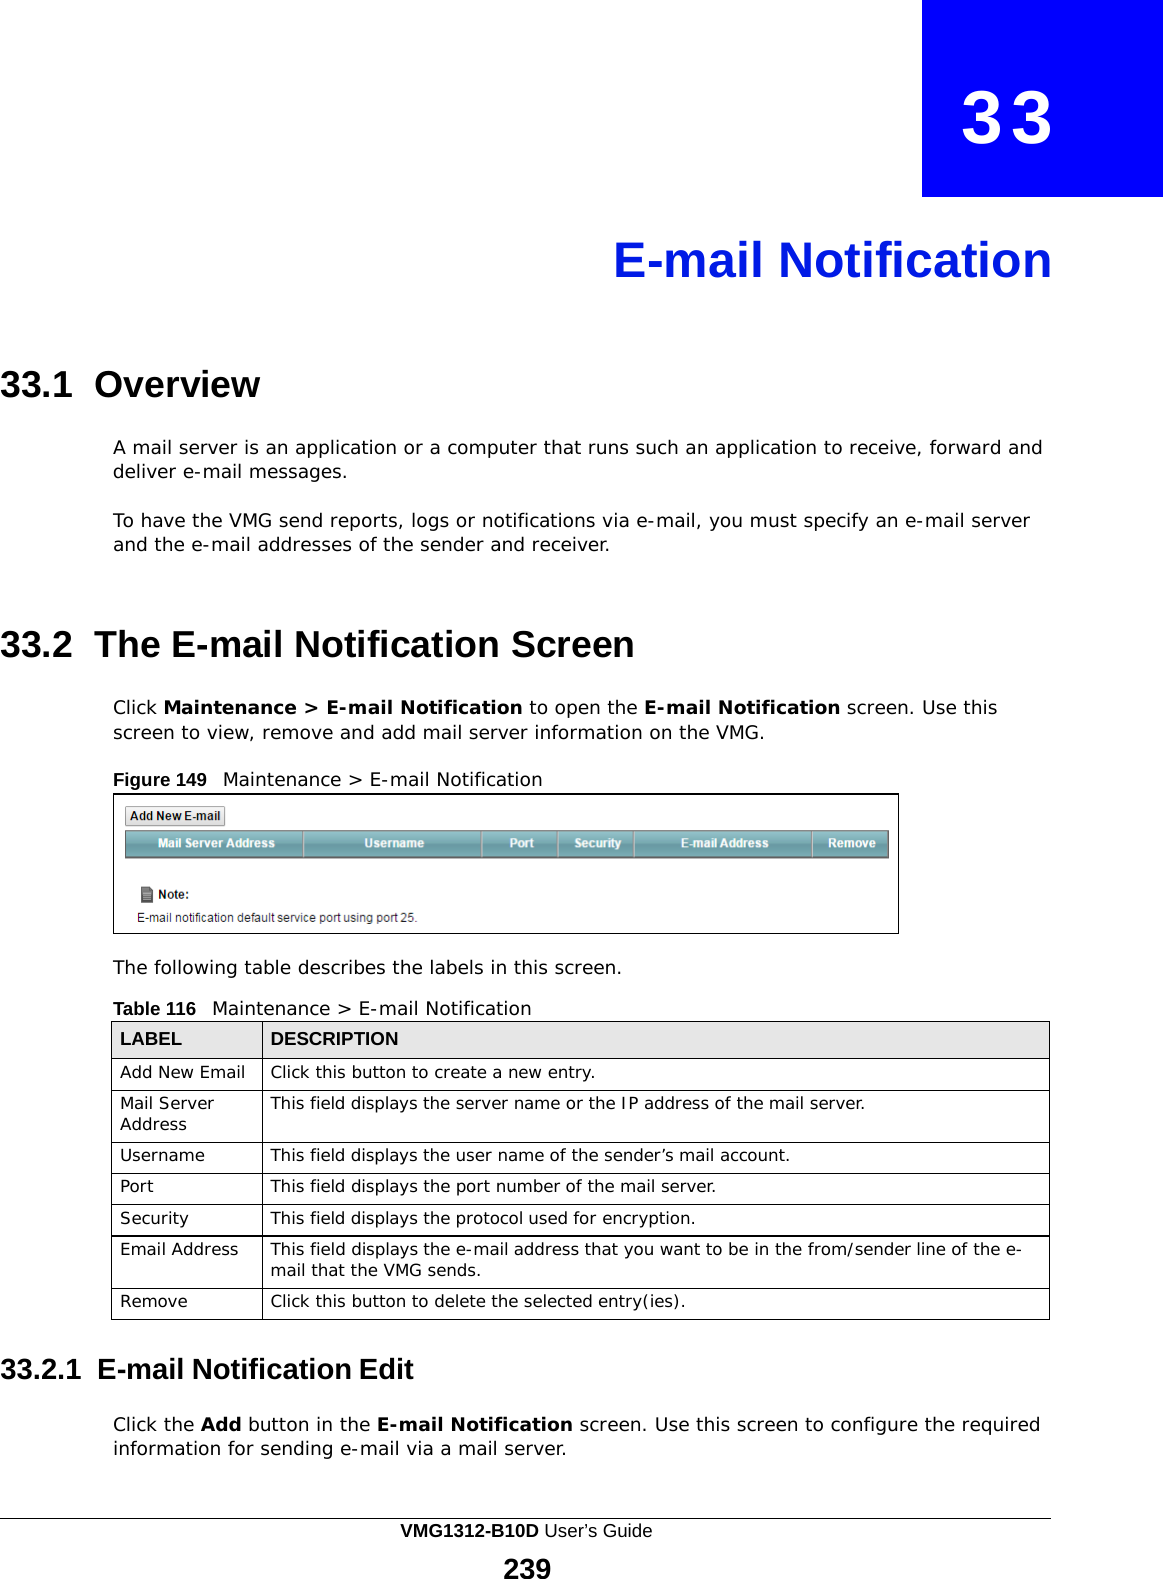    33     E-mail Notification     33.1 Overview  A mail server is an application or a computer that runs such an application to receive, forward and deliver e-mail messages.  To have the VMG send reports, logs or notifications via e-mail, you must specify an e-mail server and the e-mail addresses of the sender and receiver.    33.2 The E-mail Notification Screen  Click Maintenance &gt; E-mail Notification to open the E-mail Notification screen. Use this screen to view, remove and add mail server information on the VMG.  Figure 149   Maintenance &gt; E-mail Notification         The following table describes the labels in this screen.  Table 116   Maintenance &gt; E-mail Notification  LABEL DESCRIPTION Add New Email Click this button to create a new entry. Mail Server Address This field displays the server name or the IP address of the mail server. Username This field displays the user name of the sender’s mail account. Port This field displays the port number of the mail server. Security This field displays the protocol used for encryption. Email Address This field displays the e-mail address that you want to be in the from/sender line of the e- mail that the VMG sends. Remove Click this button to delete the selected entry(ies).  33.2.1  E-mail Notification Edit  Click the Add button in the E-mail Notification screen. Use this screen to configure the required information for sending e-mail via a mail server. VMG1312-B10D User’s Guide 239  